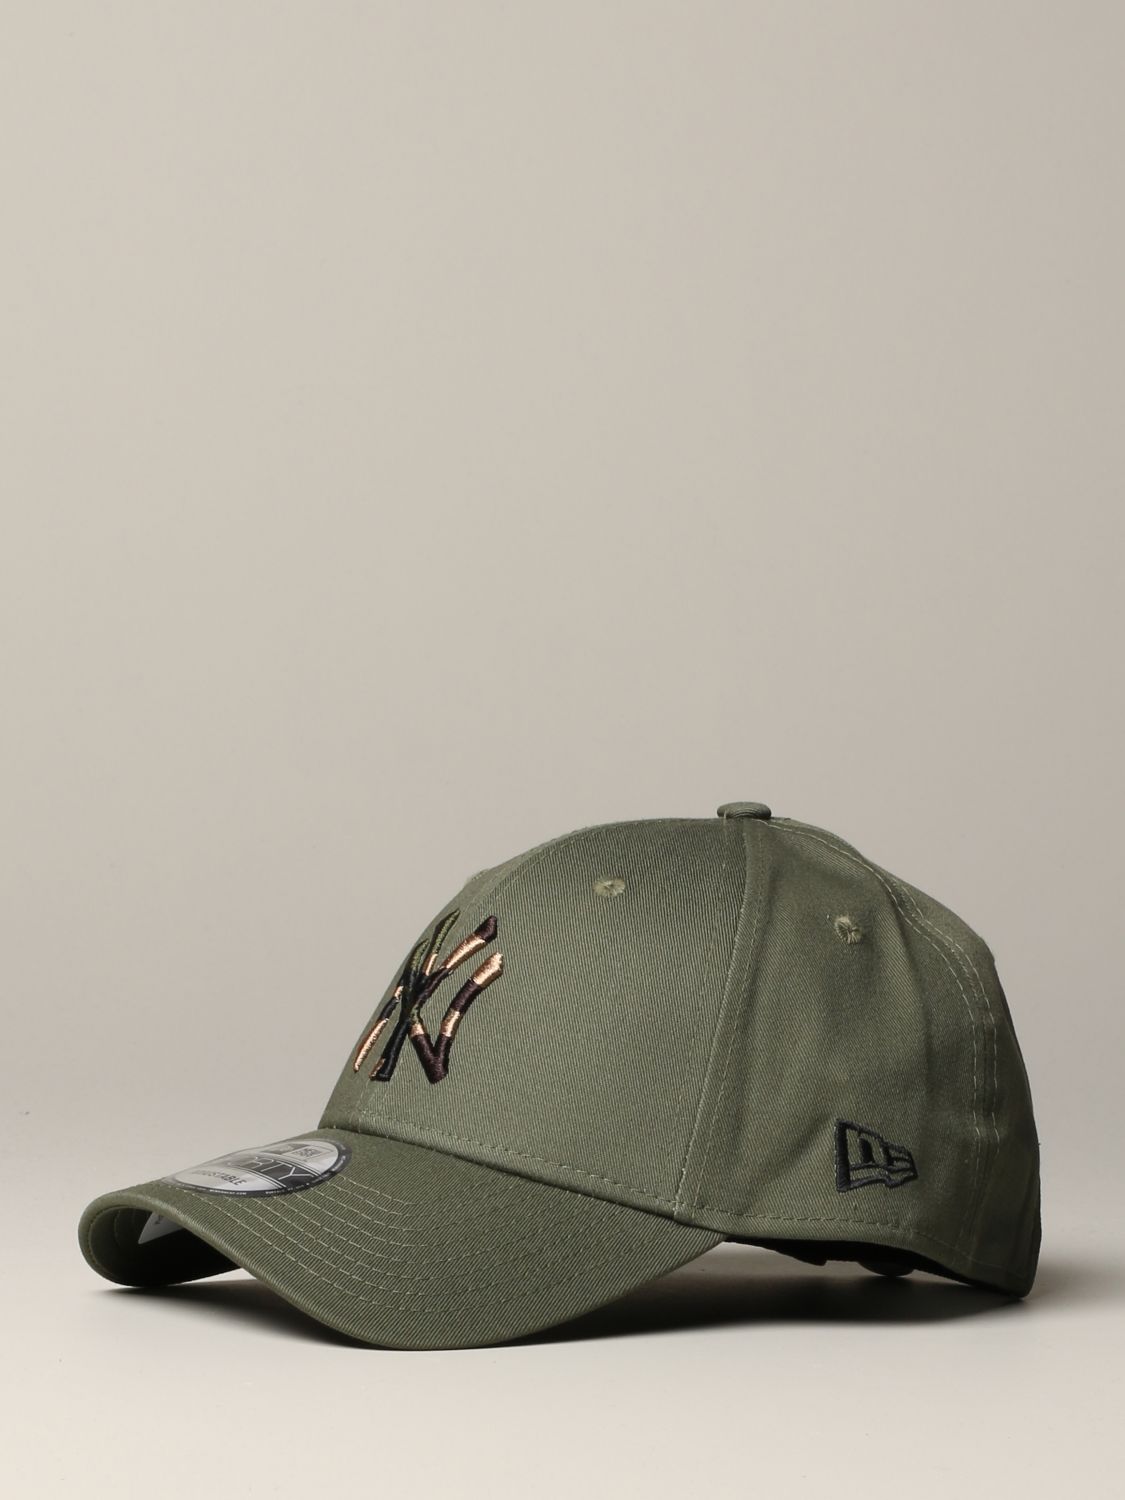 New Era Outlet: Camo infill 9forty hat with NY Yankees logo